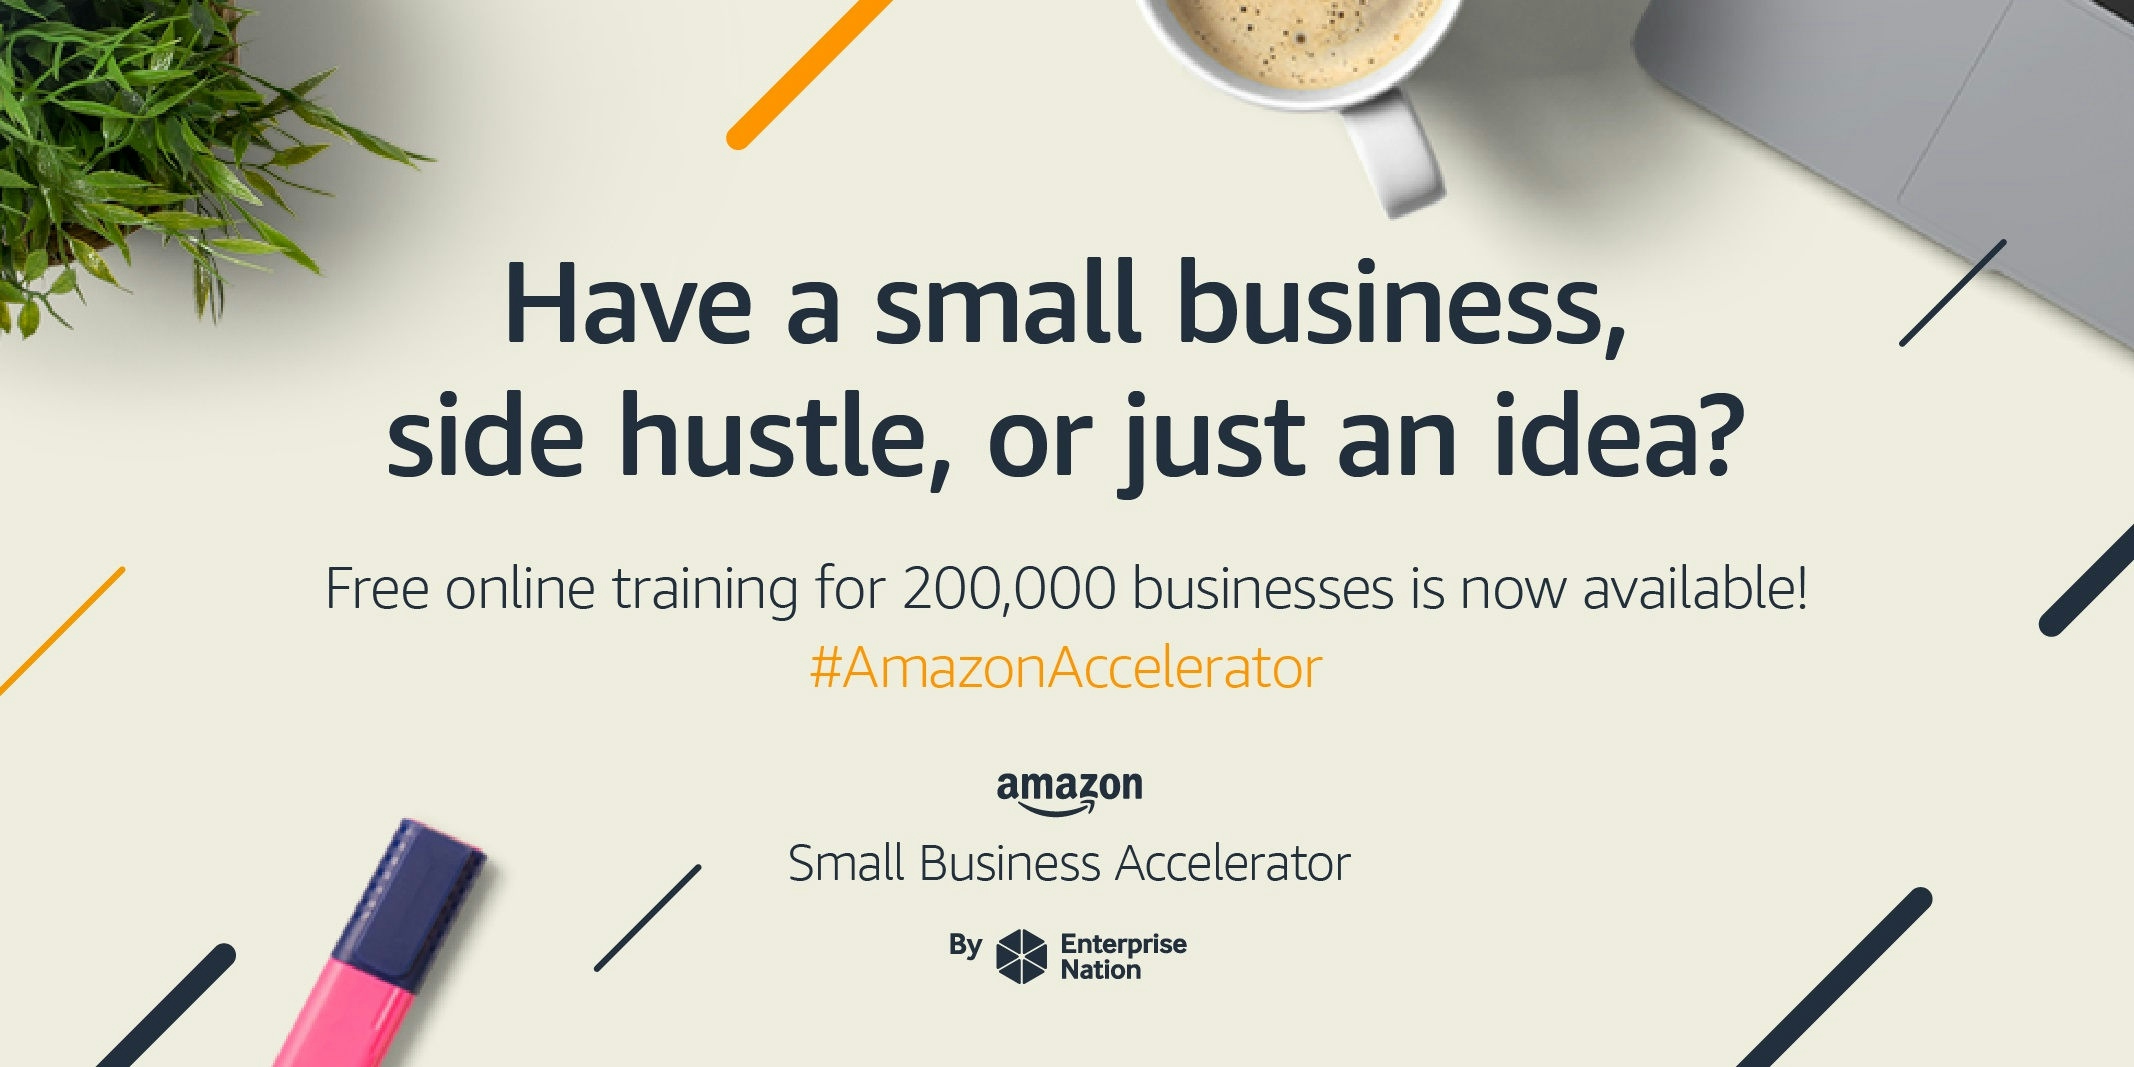 Amazon Small Business Accelerator: The most popular e-learning videos